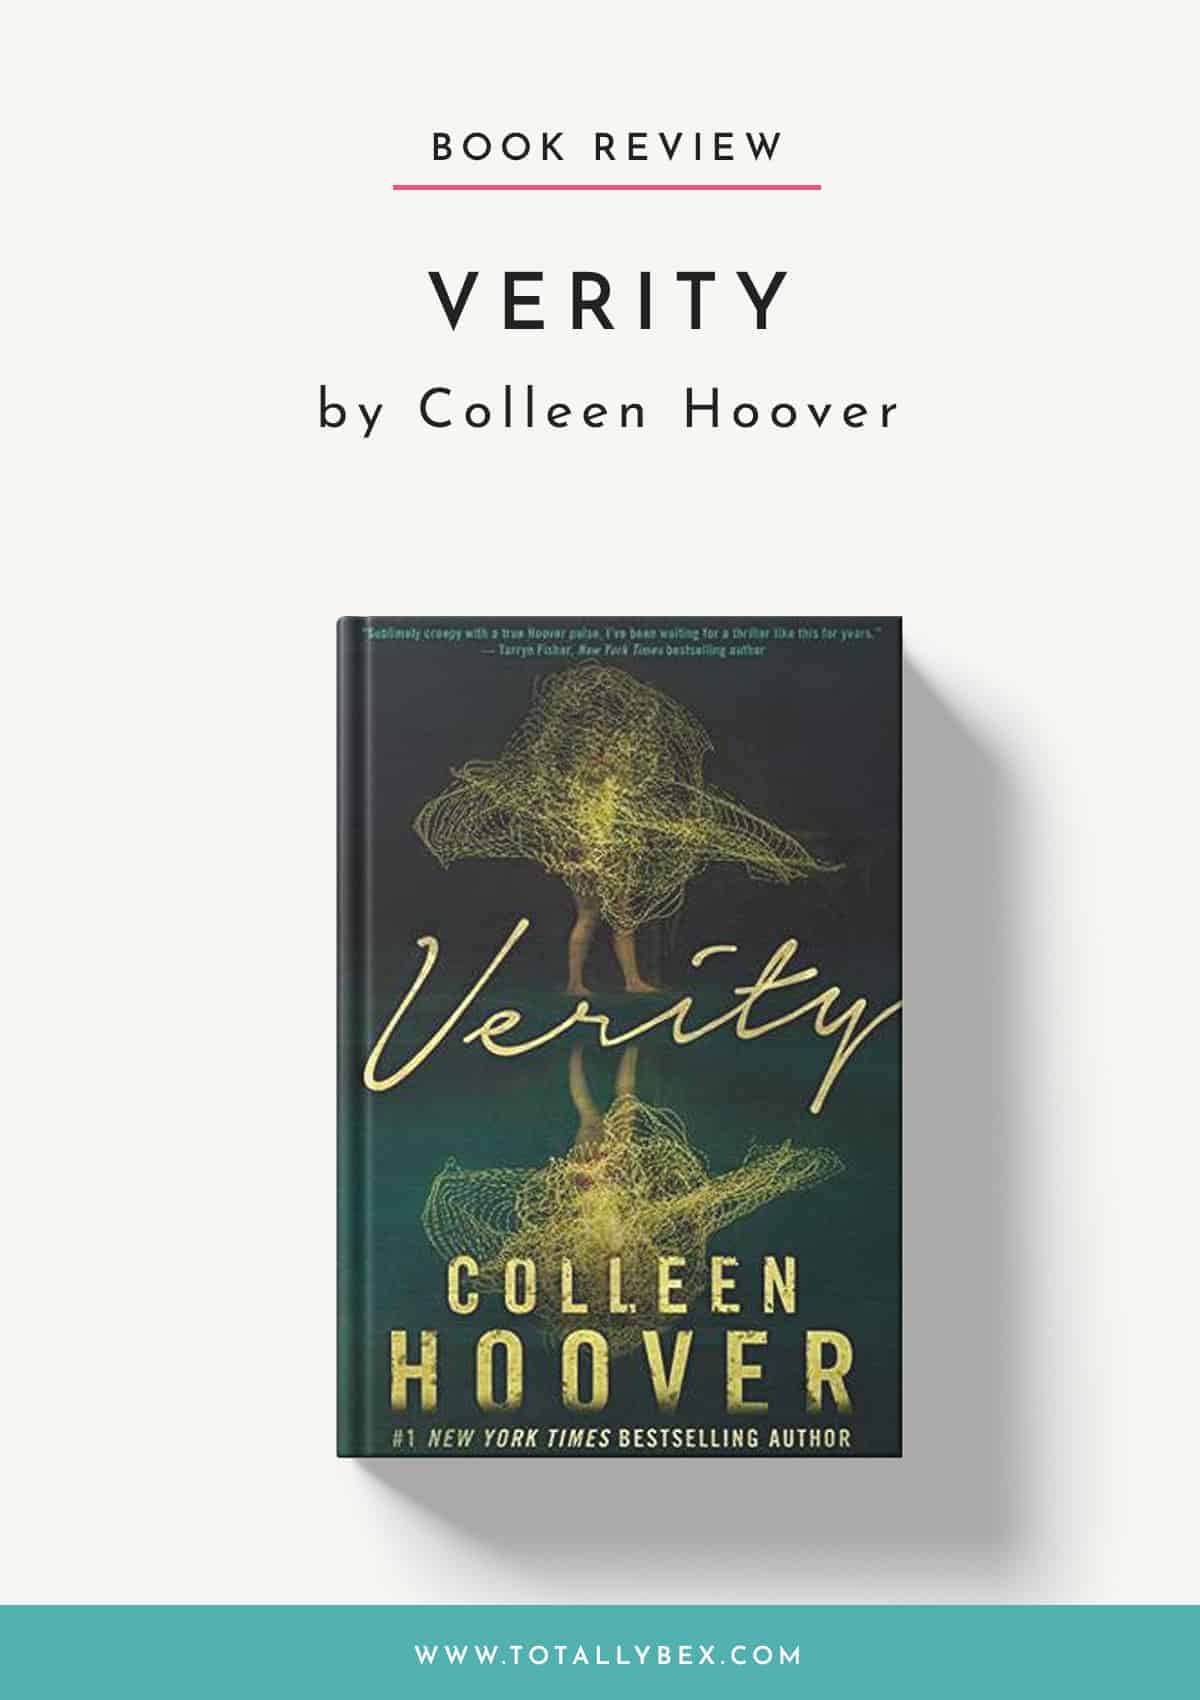 Verity by Colleen Hoover — A Devious and Twisty Departure